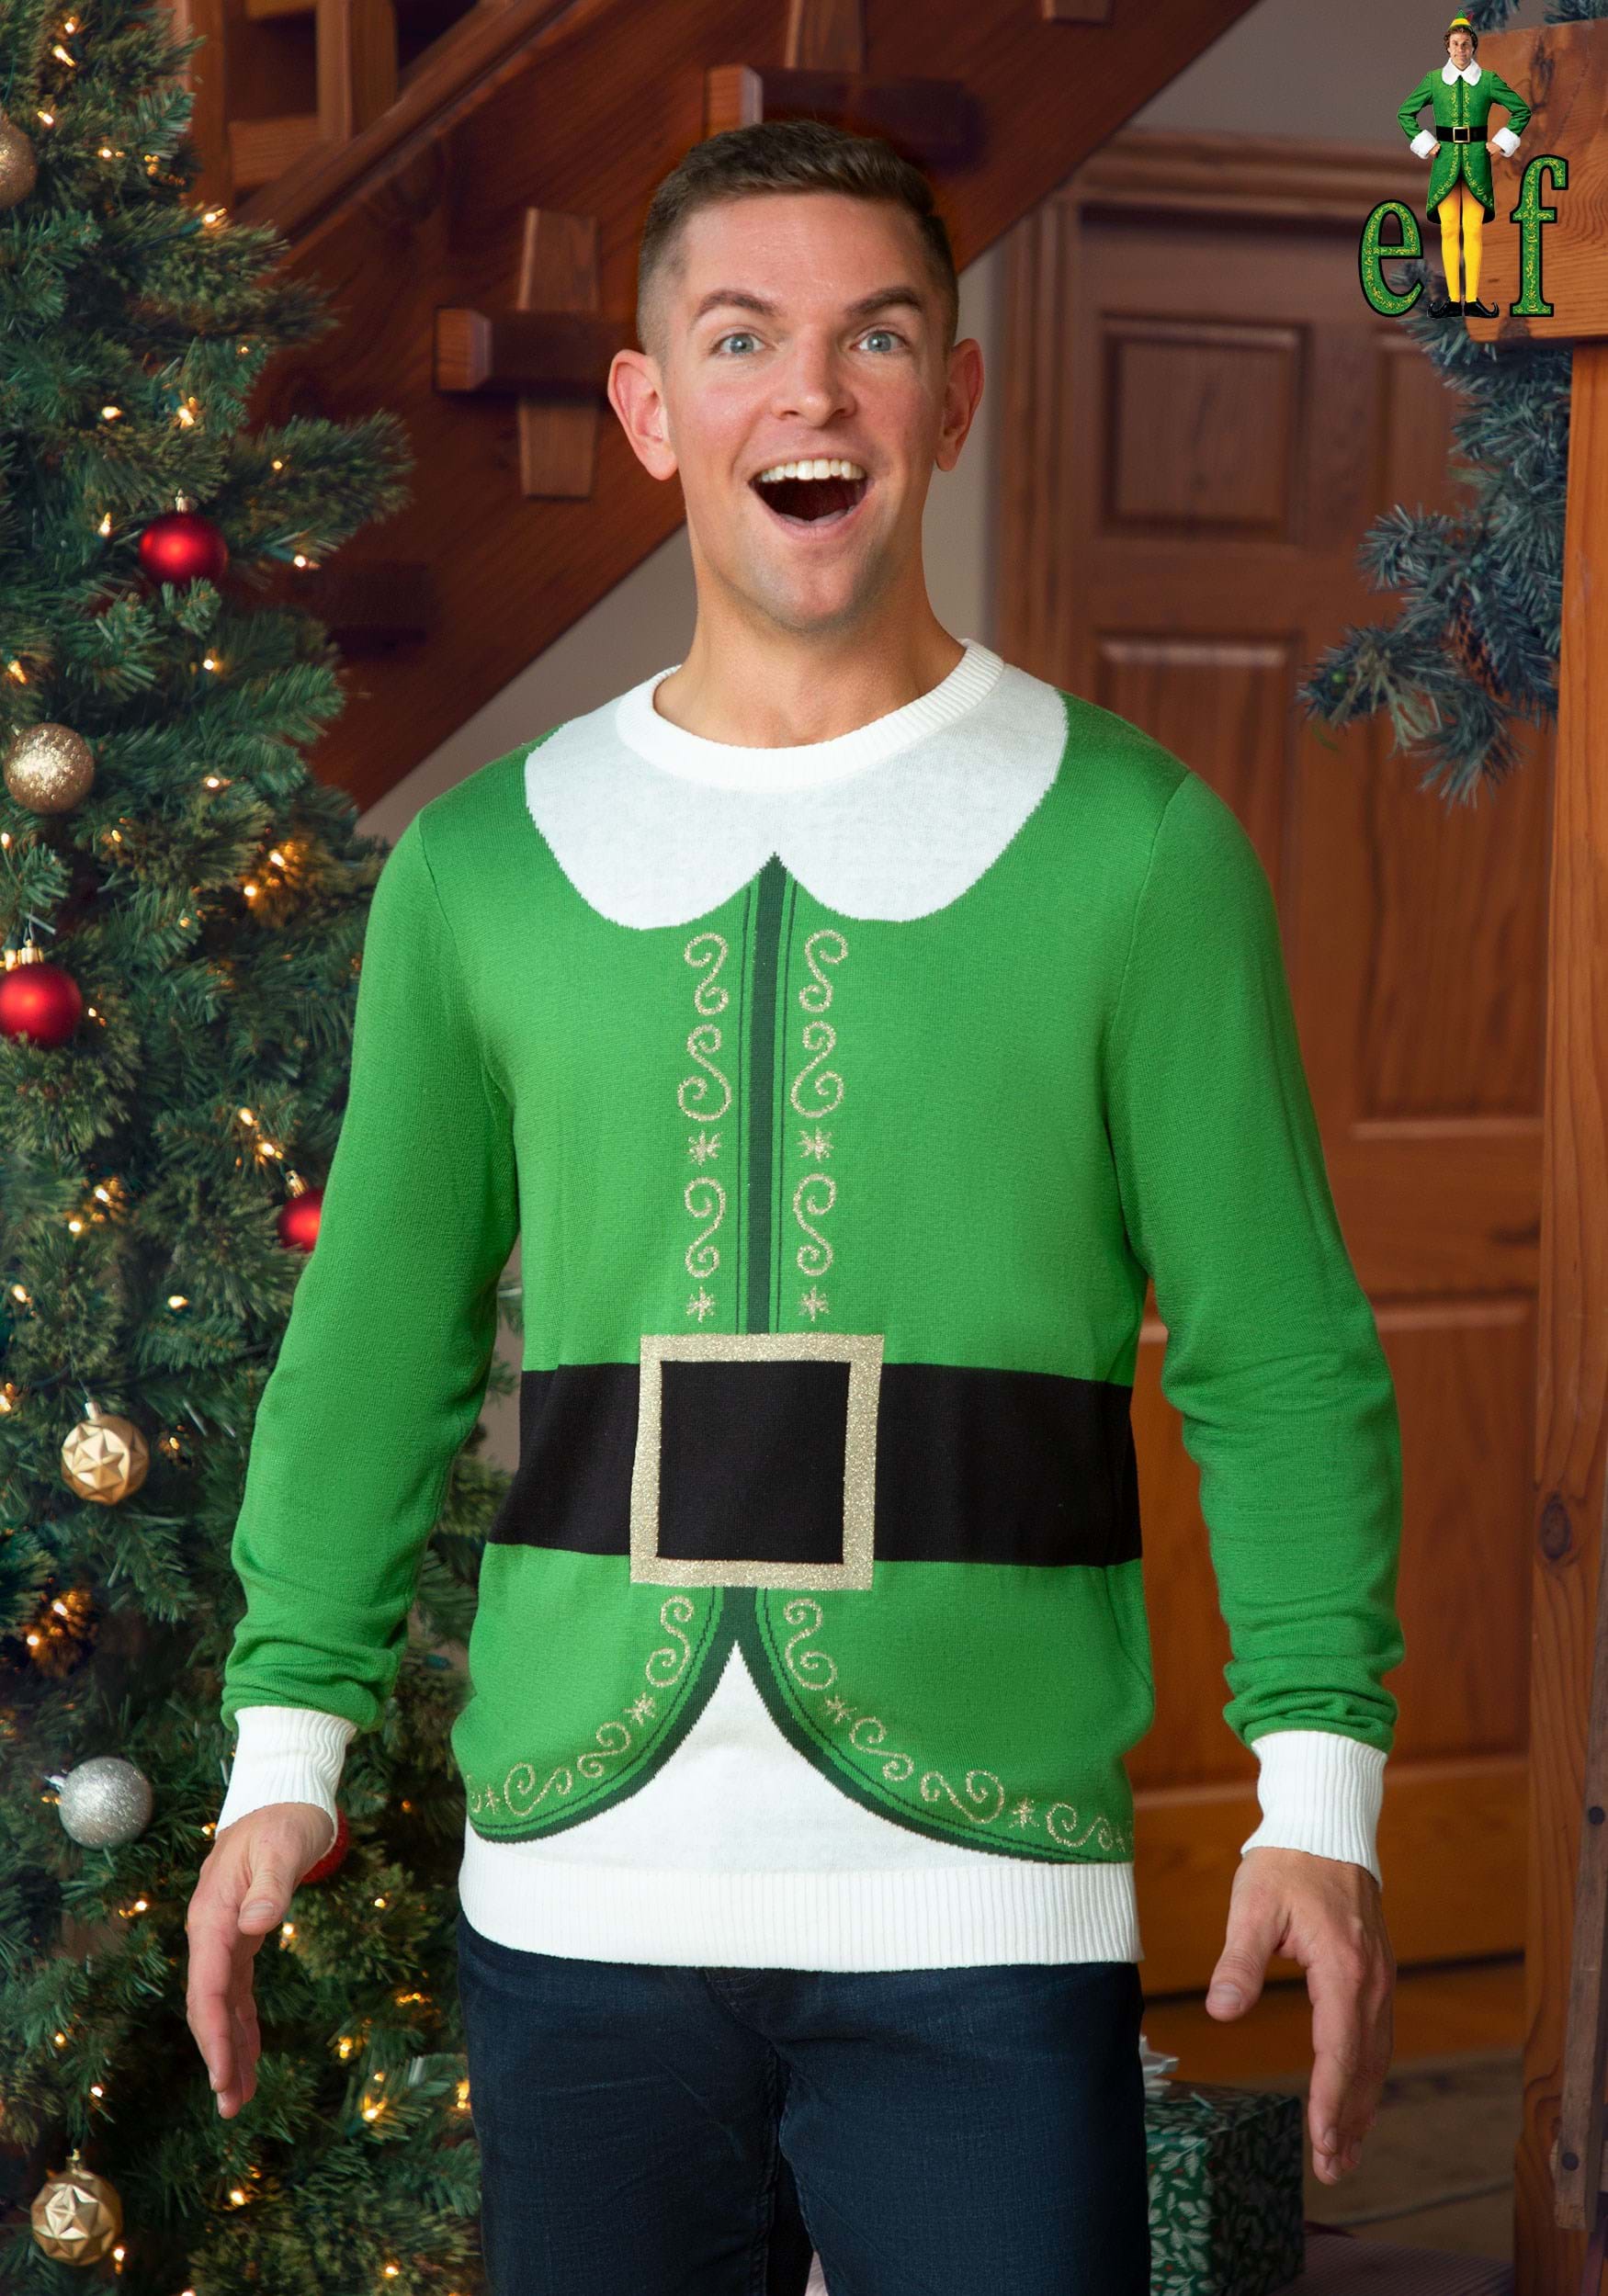 Buddy the Elf Adult Ugly Christmas Sweater